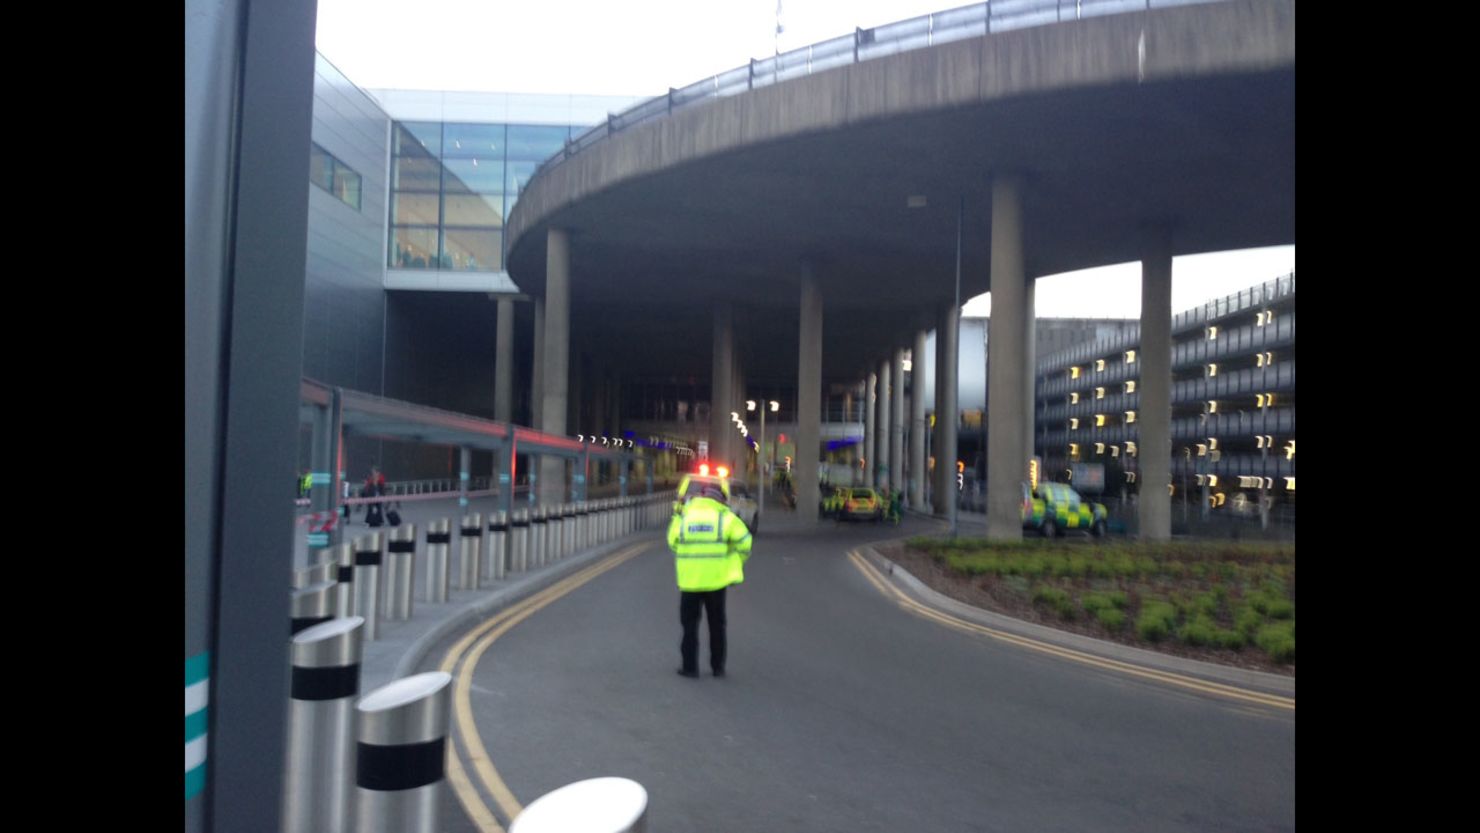 A controlled explosion was carried out at London's Gatwick Airport on a suspicious vehicle on Wednesday.